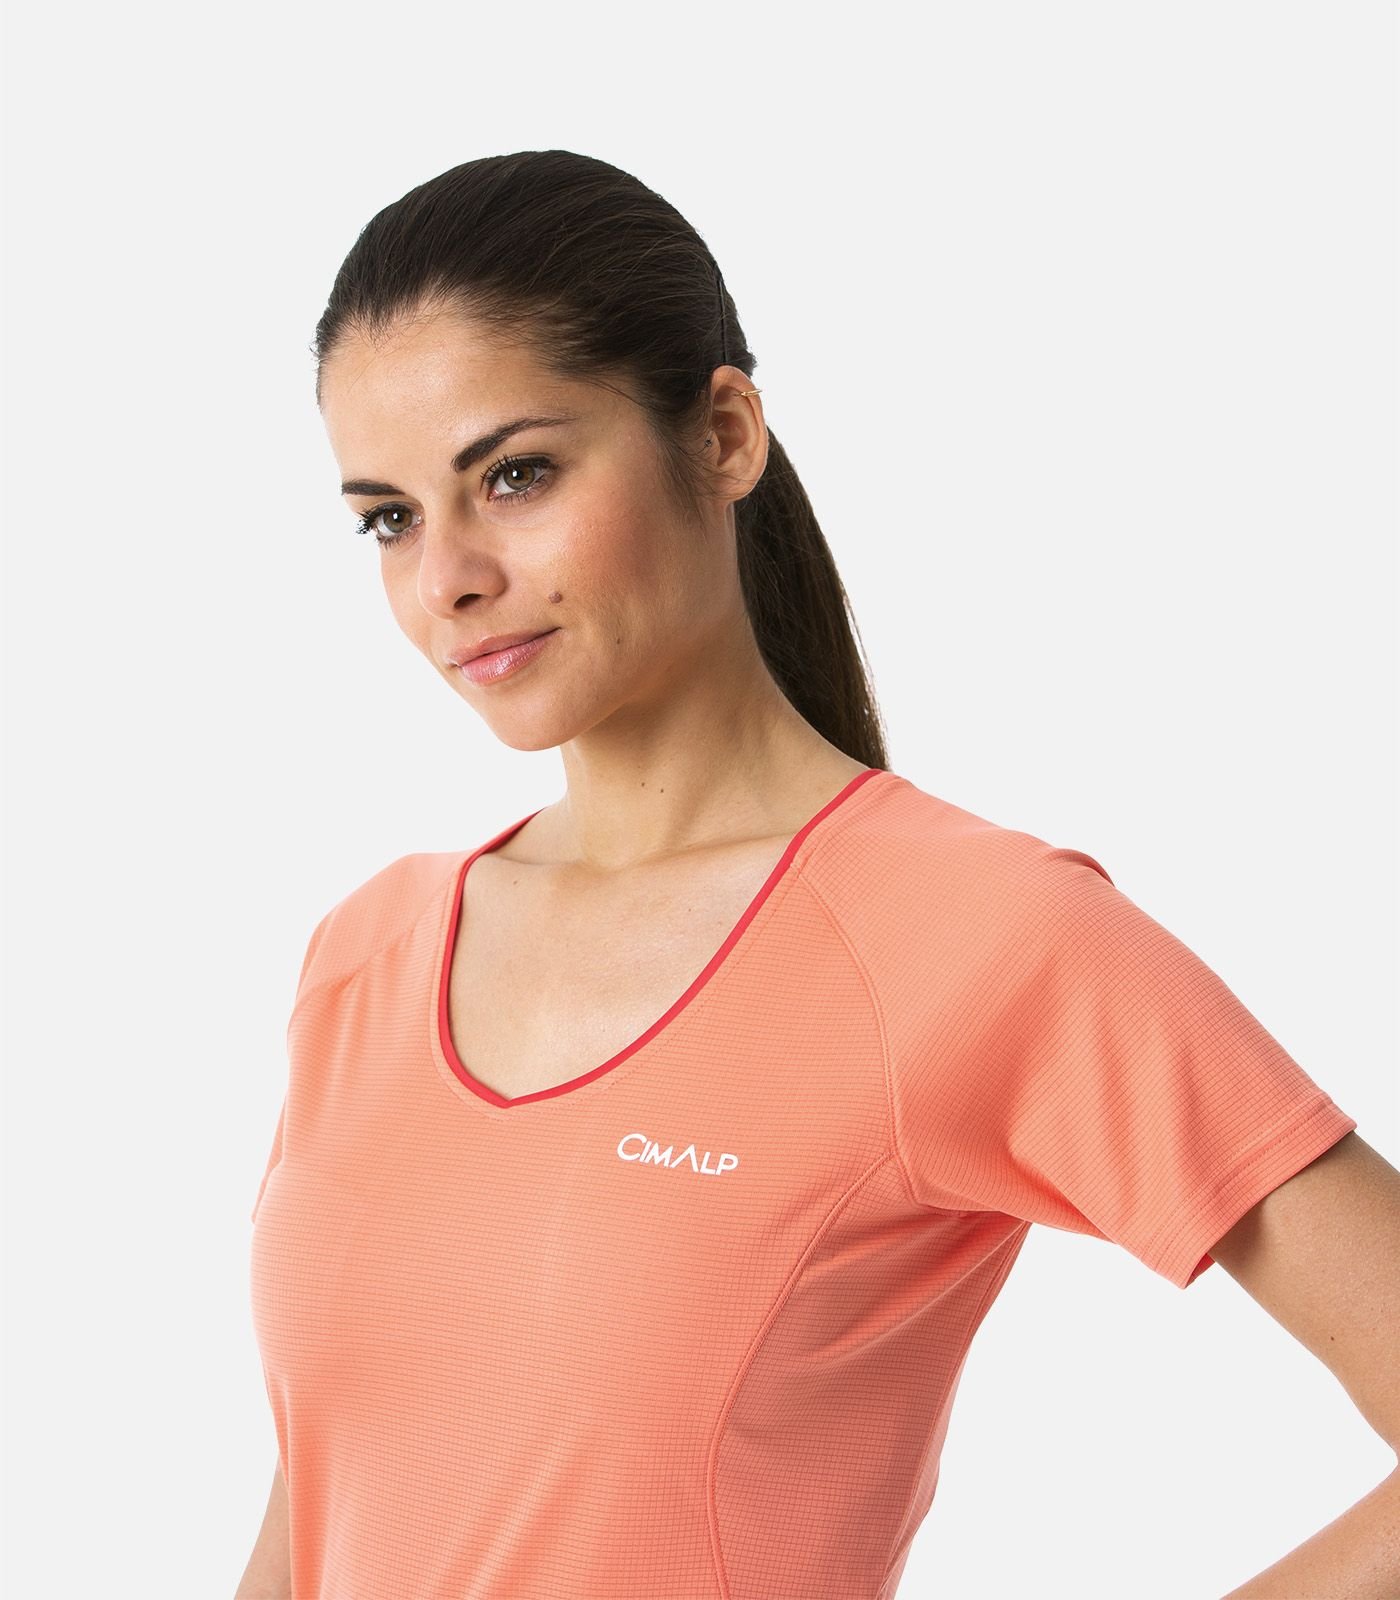 Ultra Light and Breathable T-shirt for Outdoor Sports